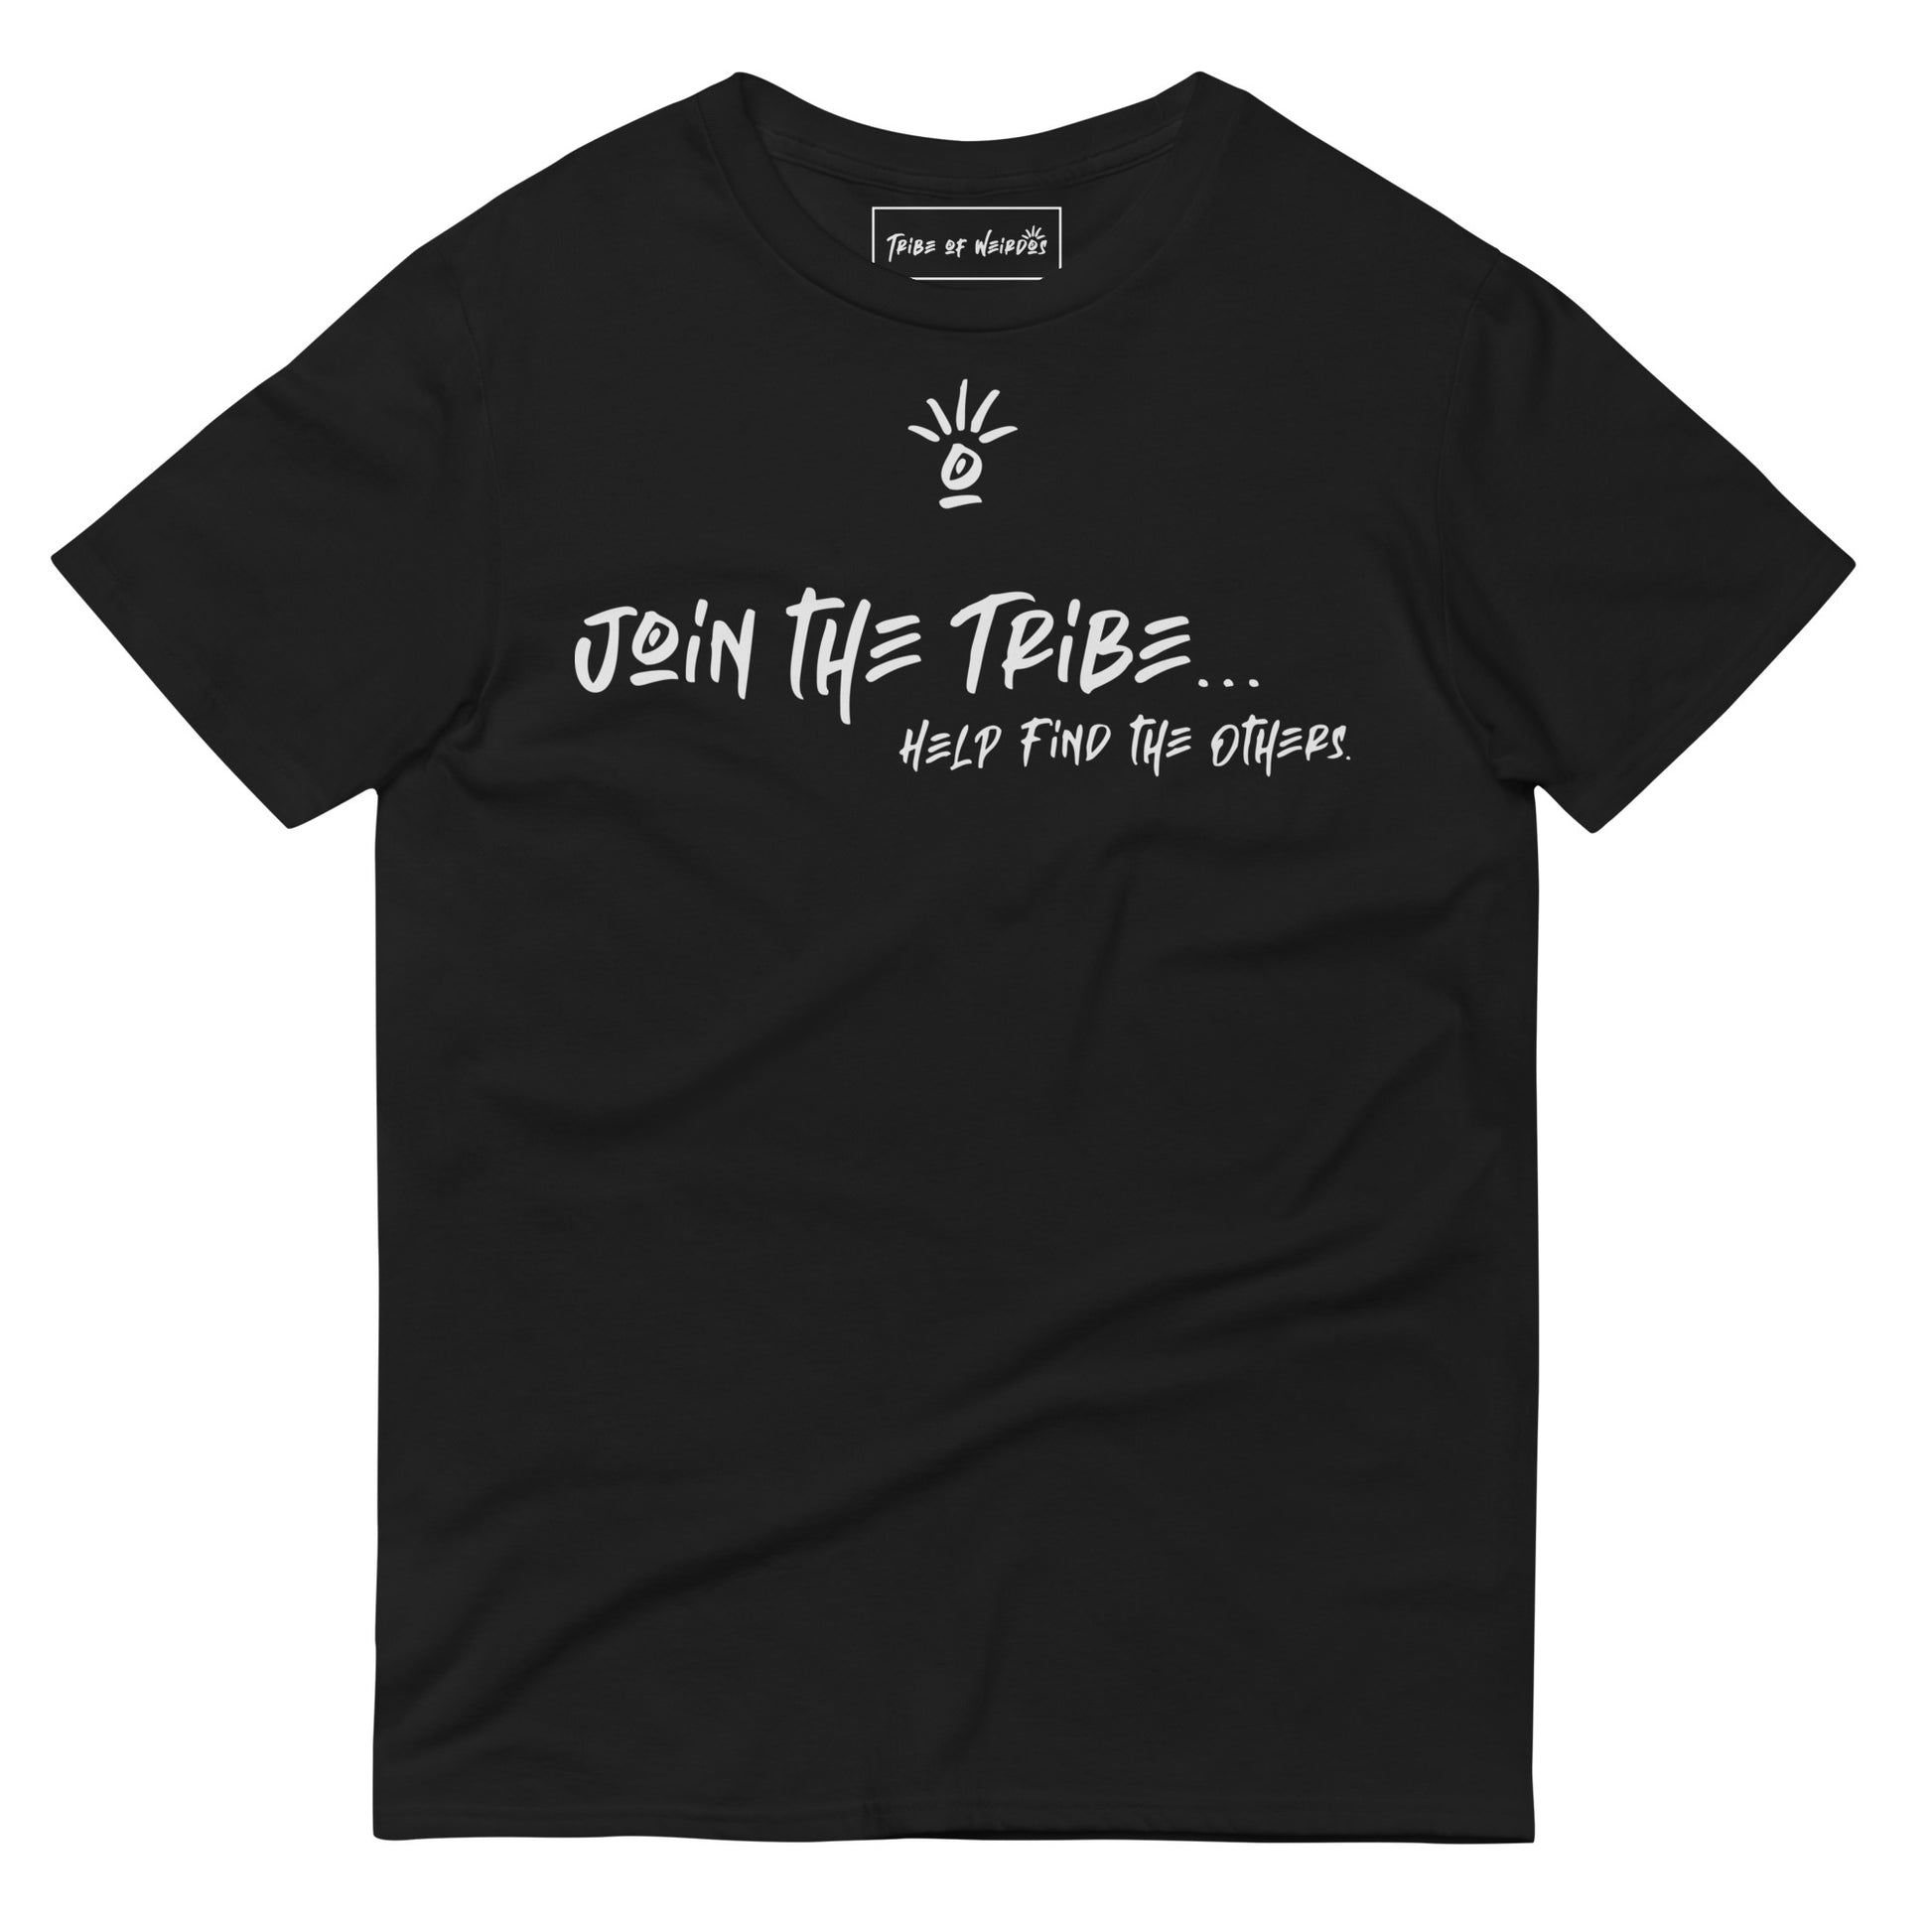 Bold 'Join The Tribe' slogan on a versatile unisex t-shirt by Tribe of Weirdos - wear it and express your belonging to a community that celebrates uniqueness